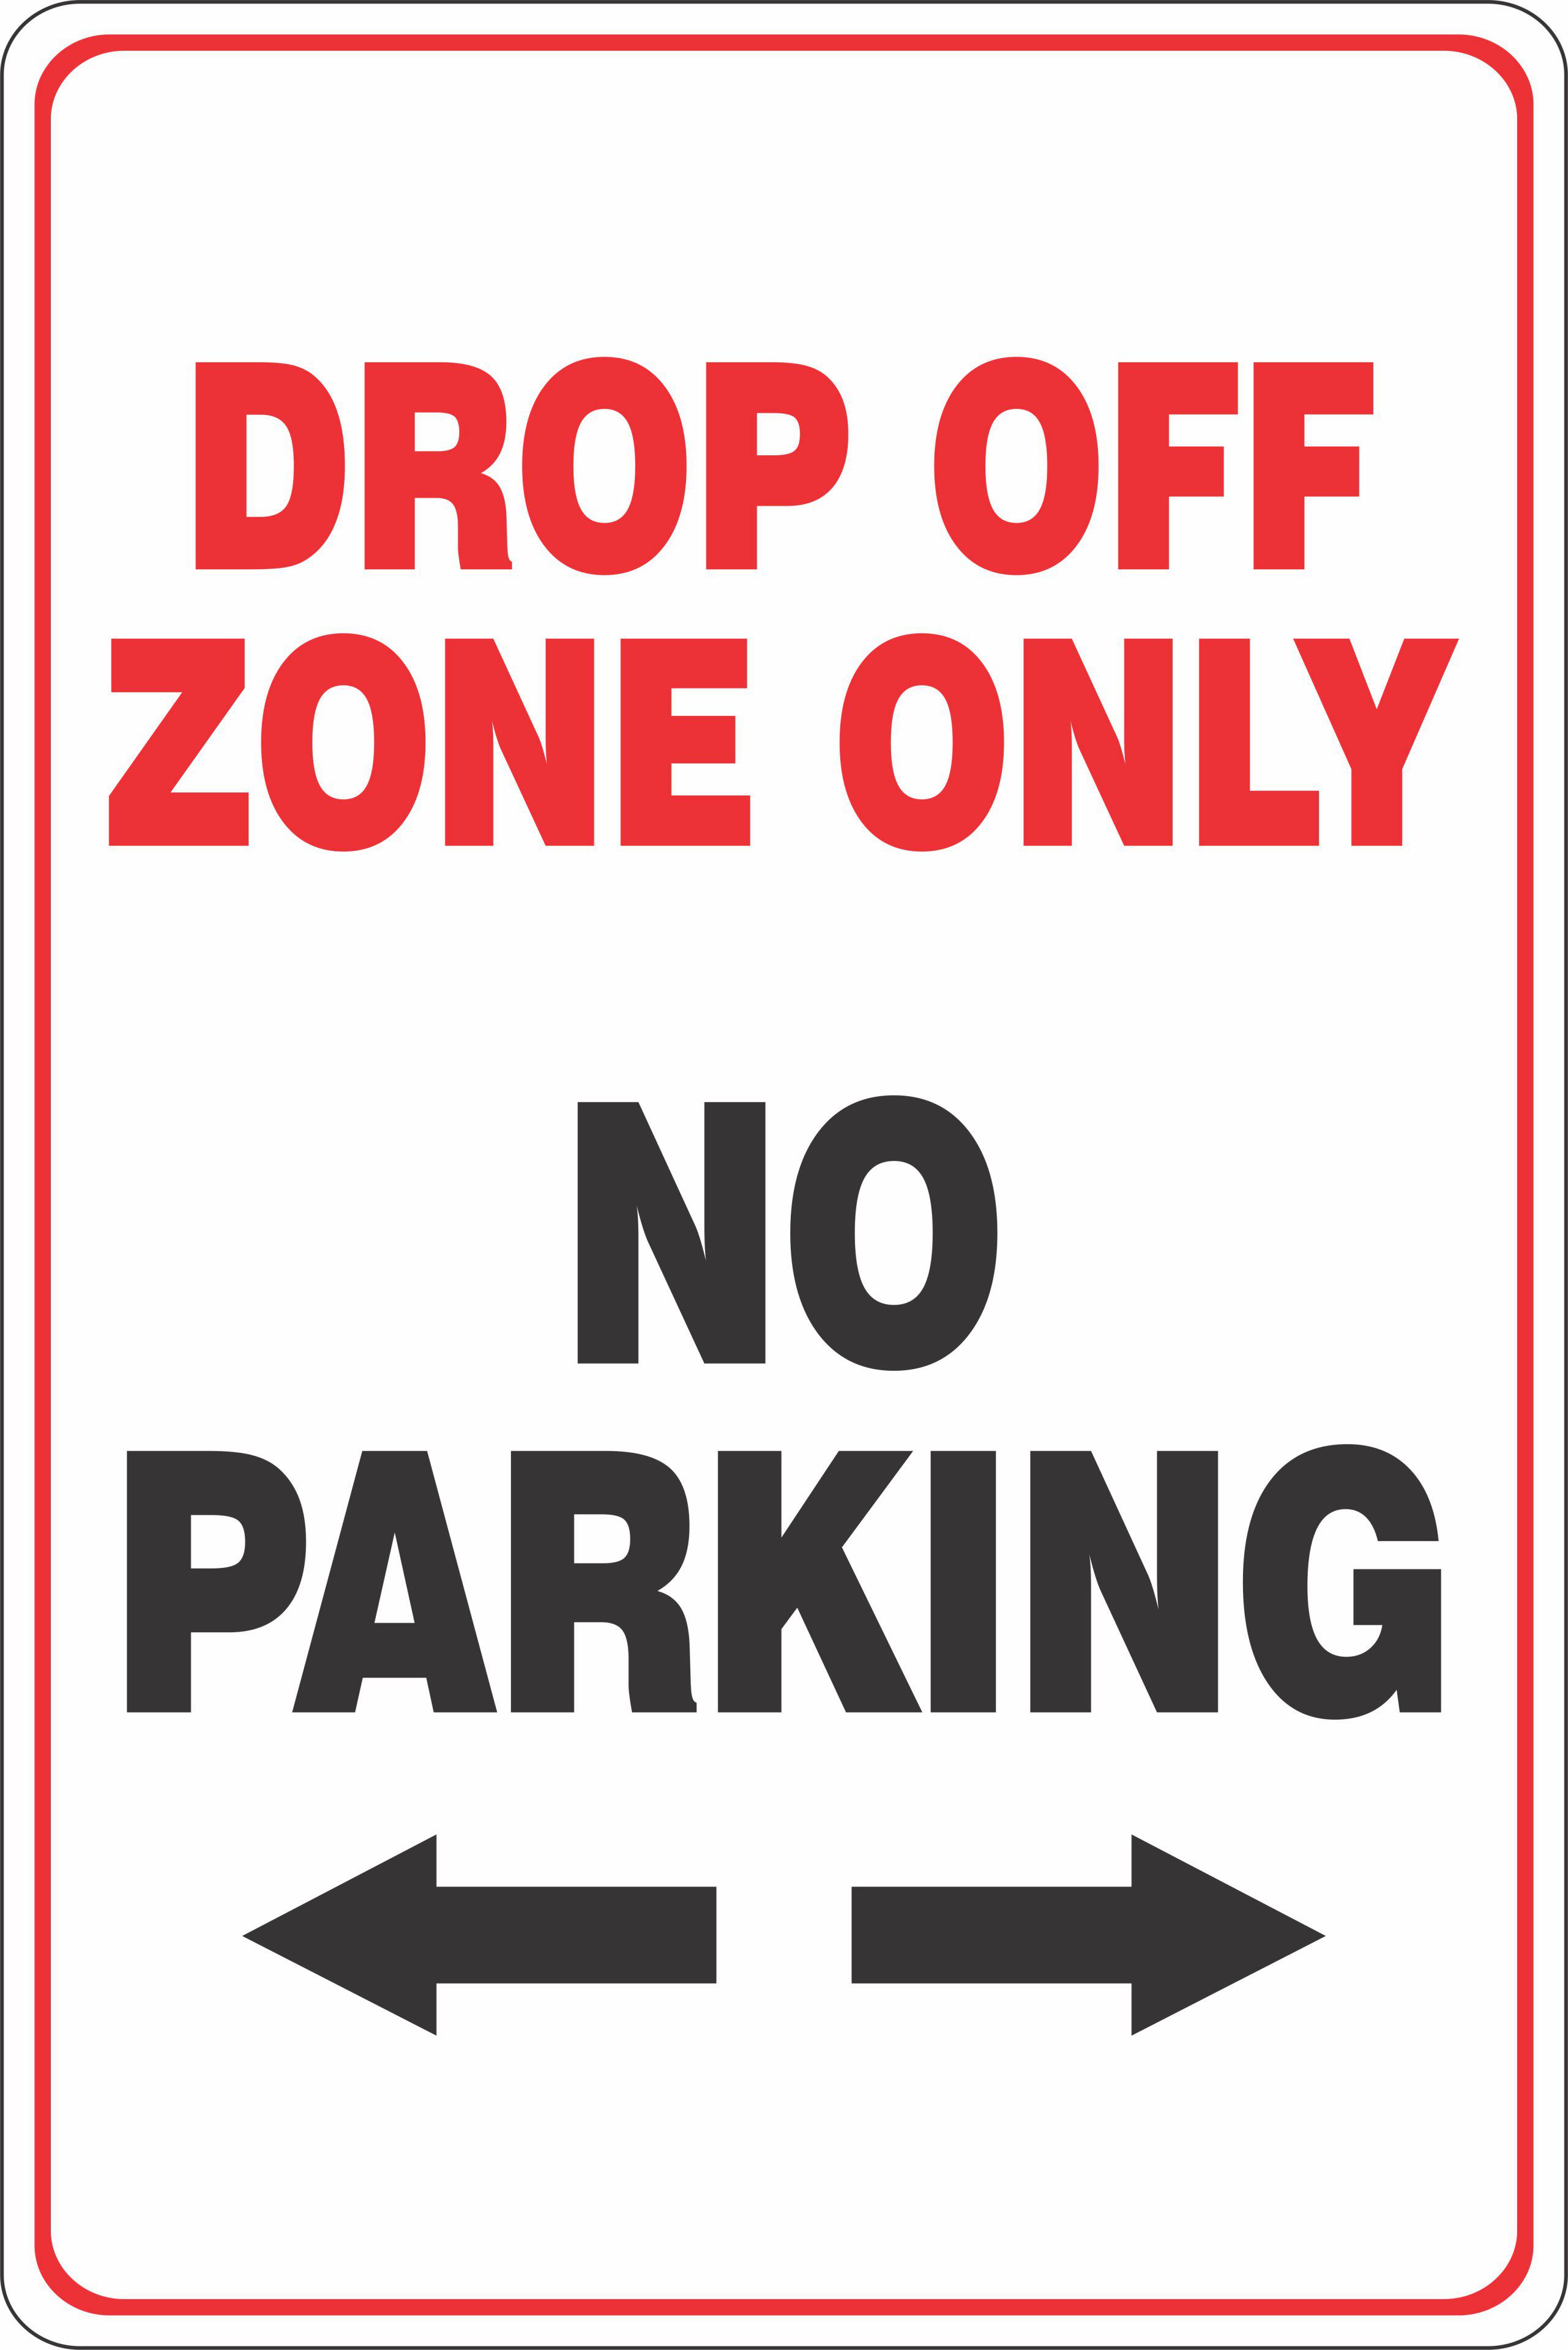 Drop Off Zone Only